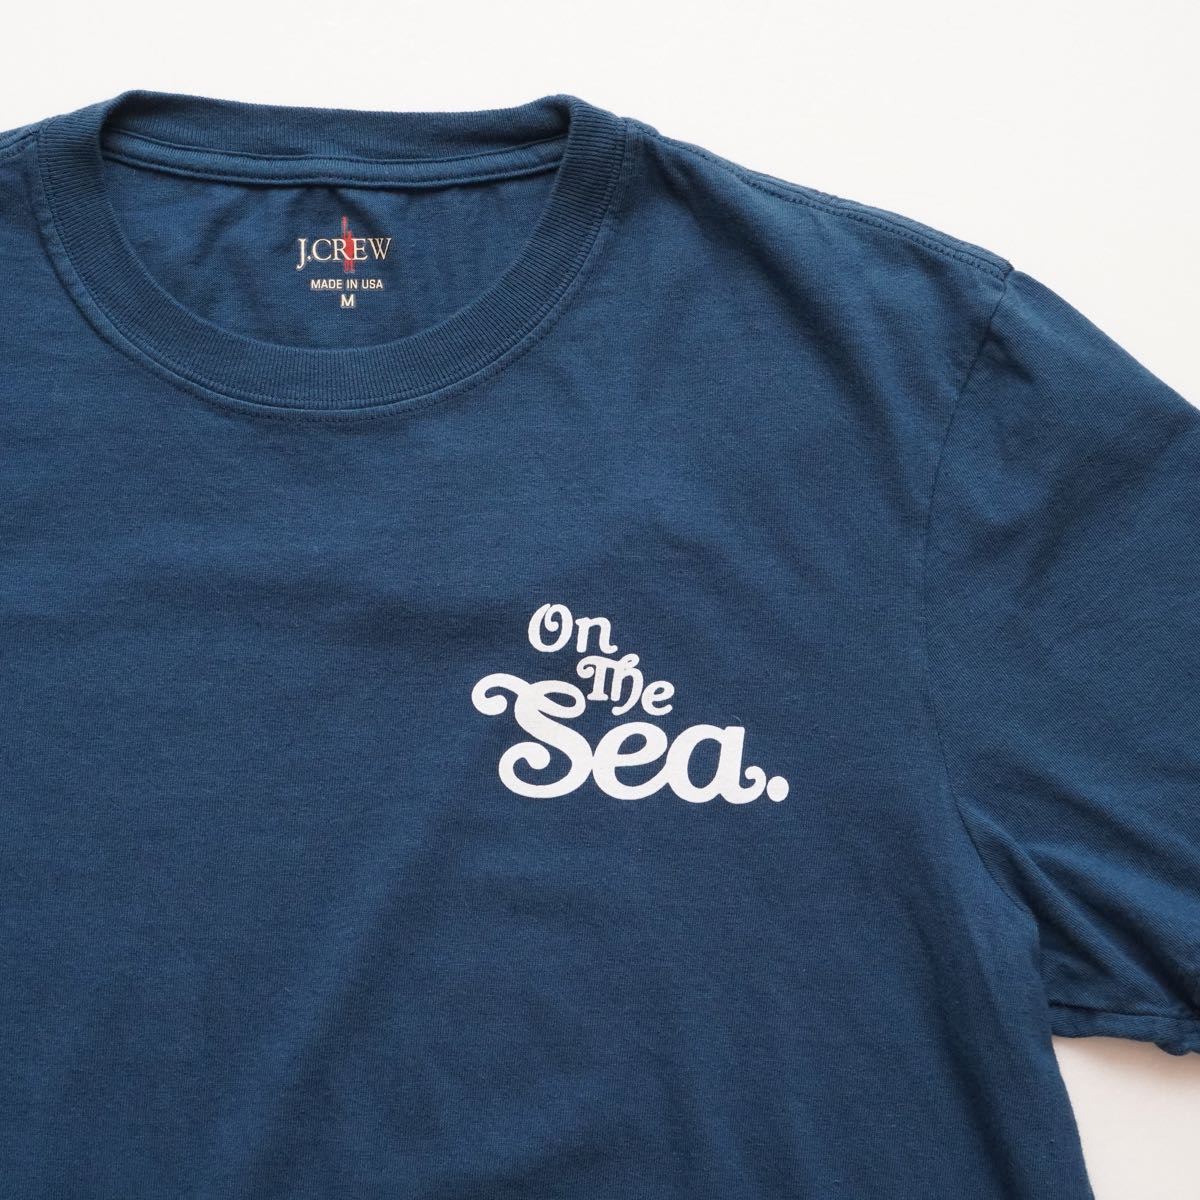 【MEN】J.Crew On The Sea Tee Made in USA